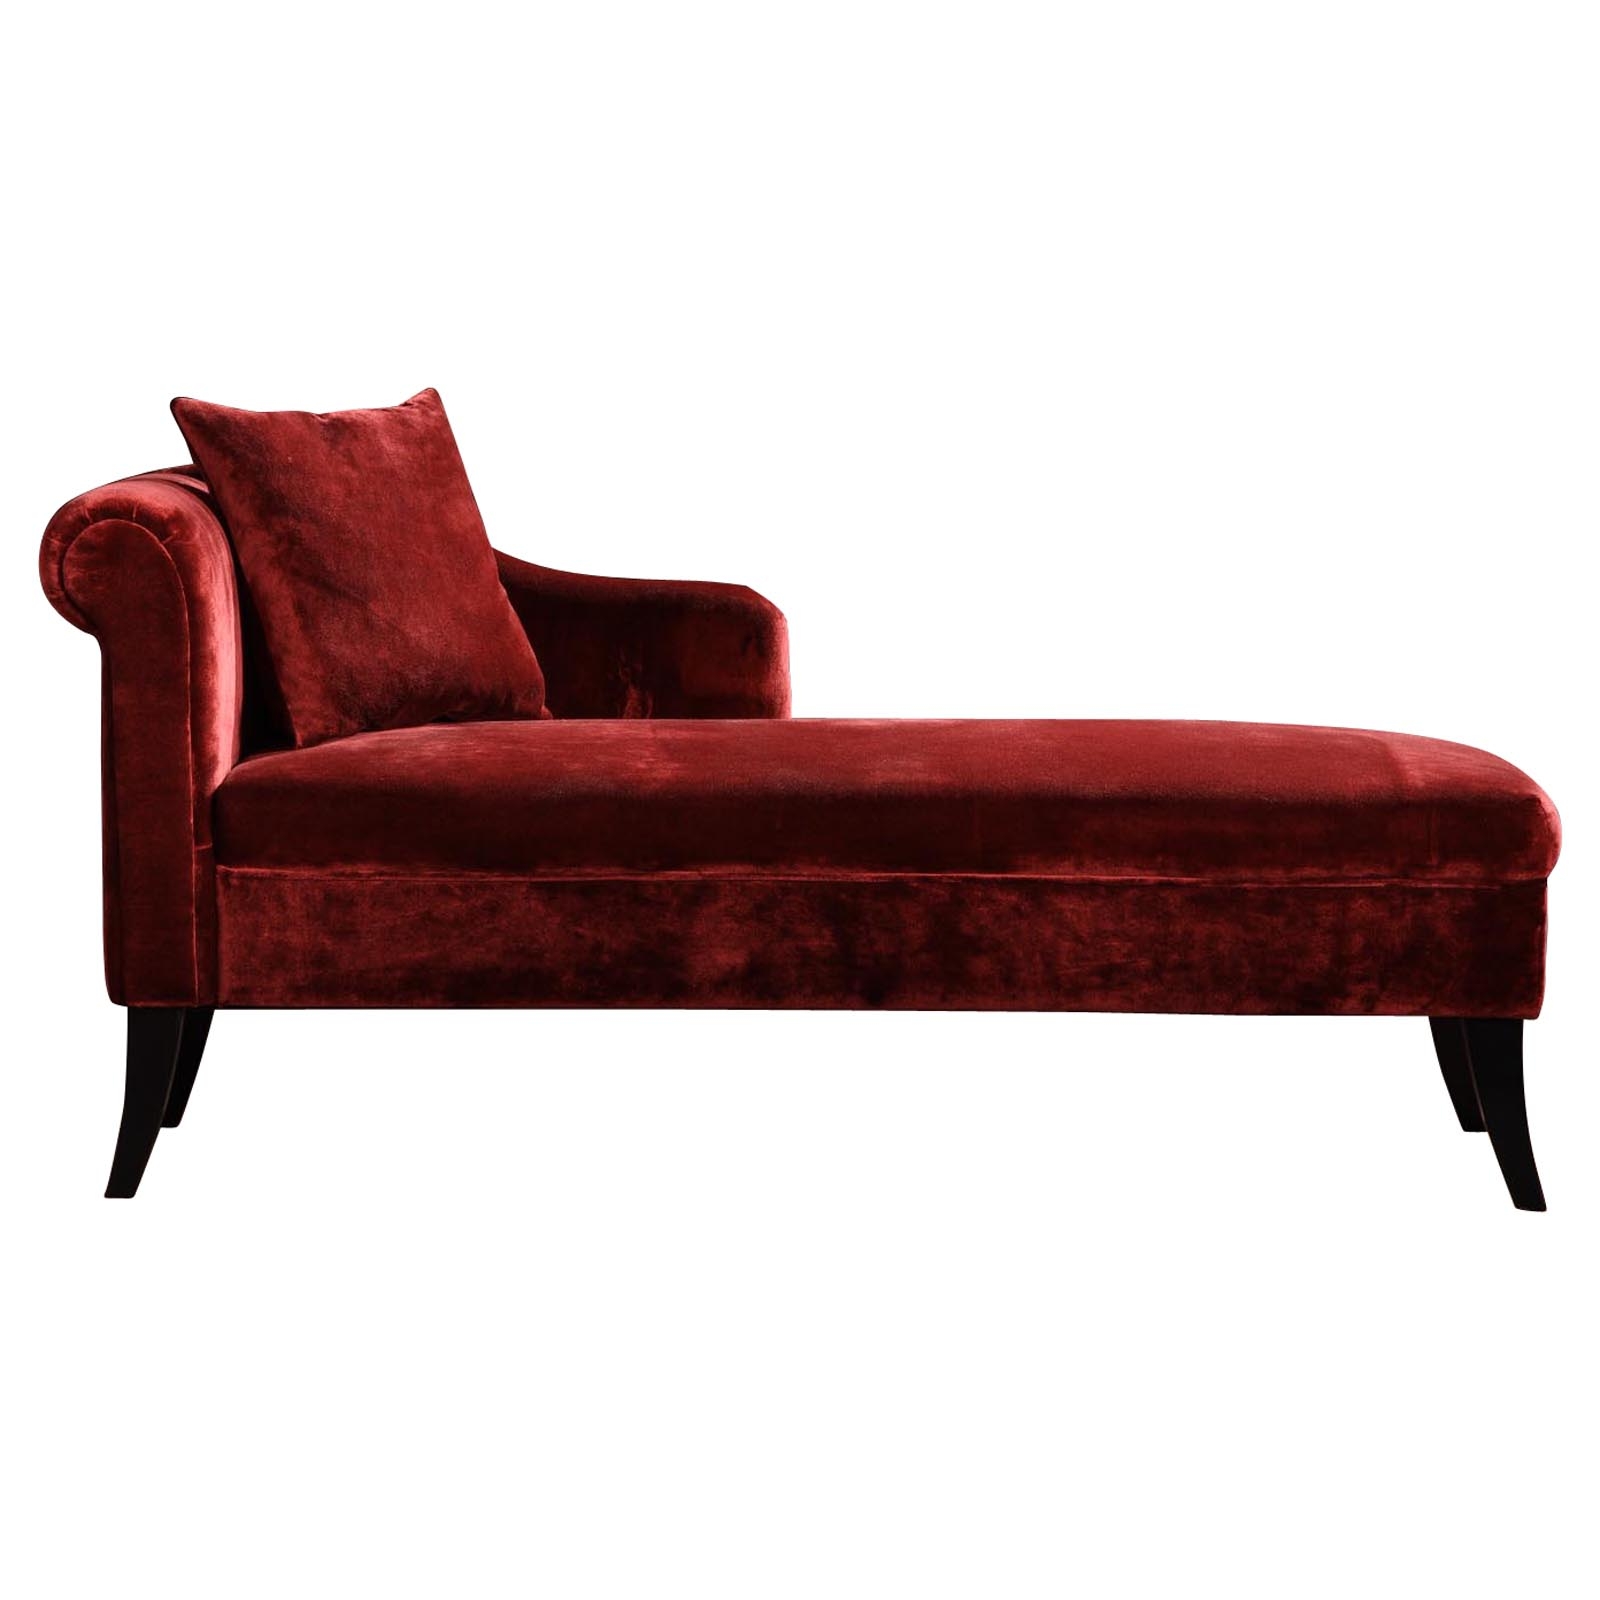 Femme fatale armen living patterson chaise in red